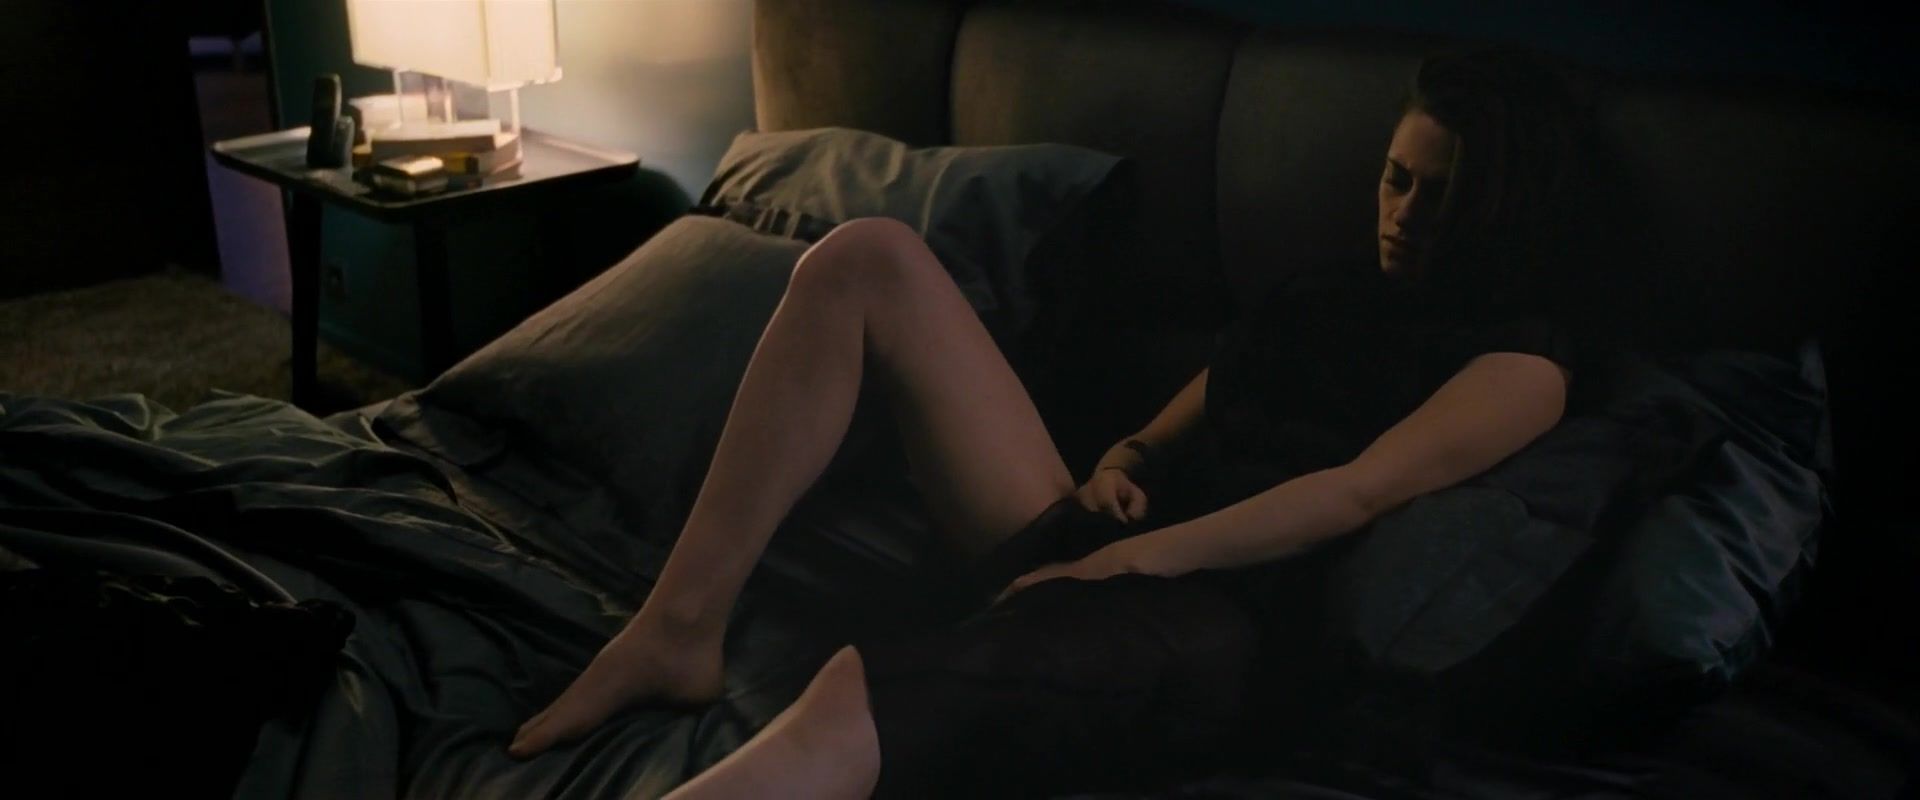 Xxx Best Celebs Scenes with naked Kristen Stewart of the movie "Personal Shopper" Nice Ass